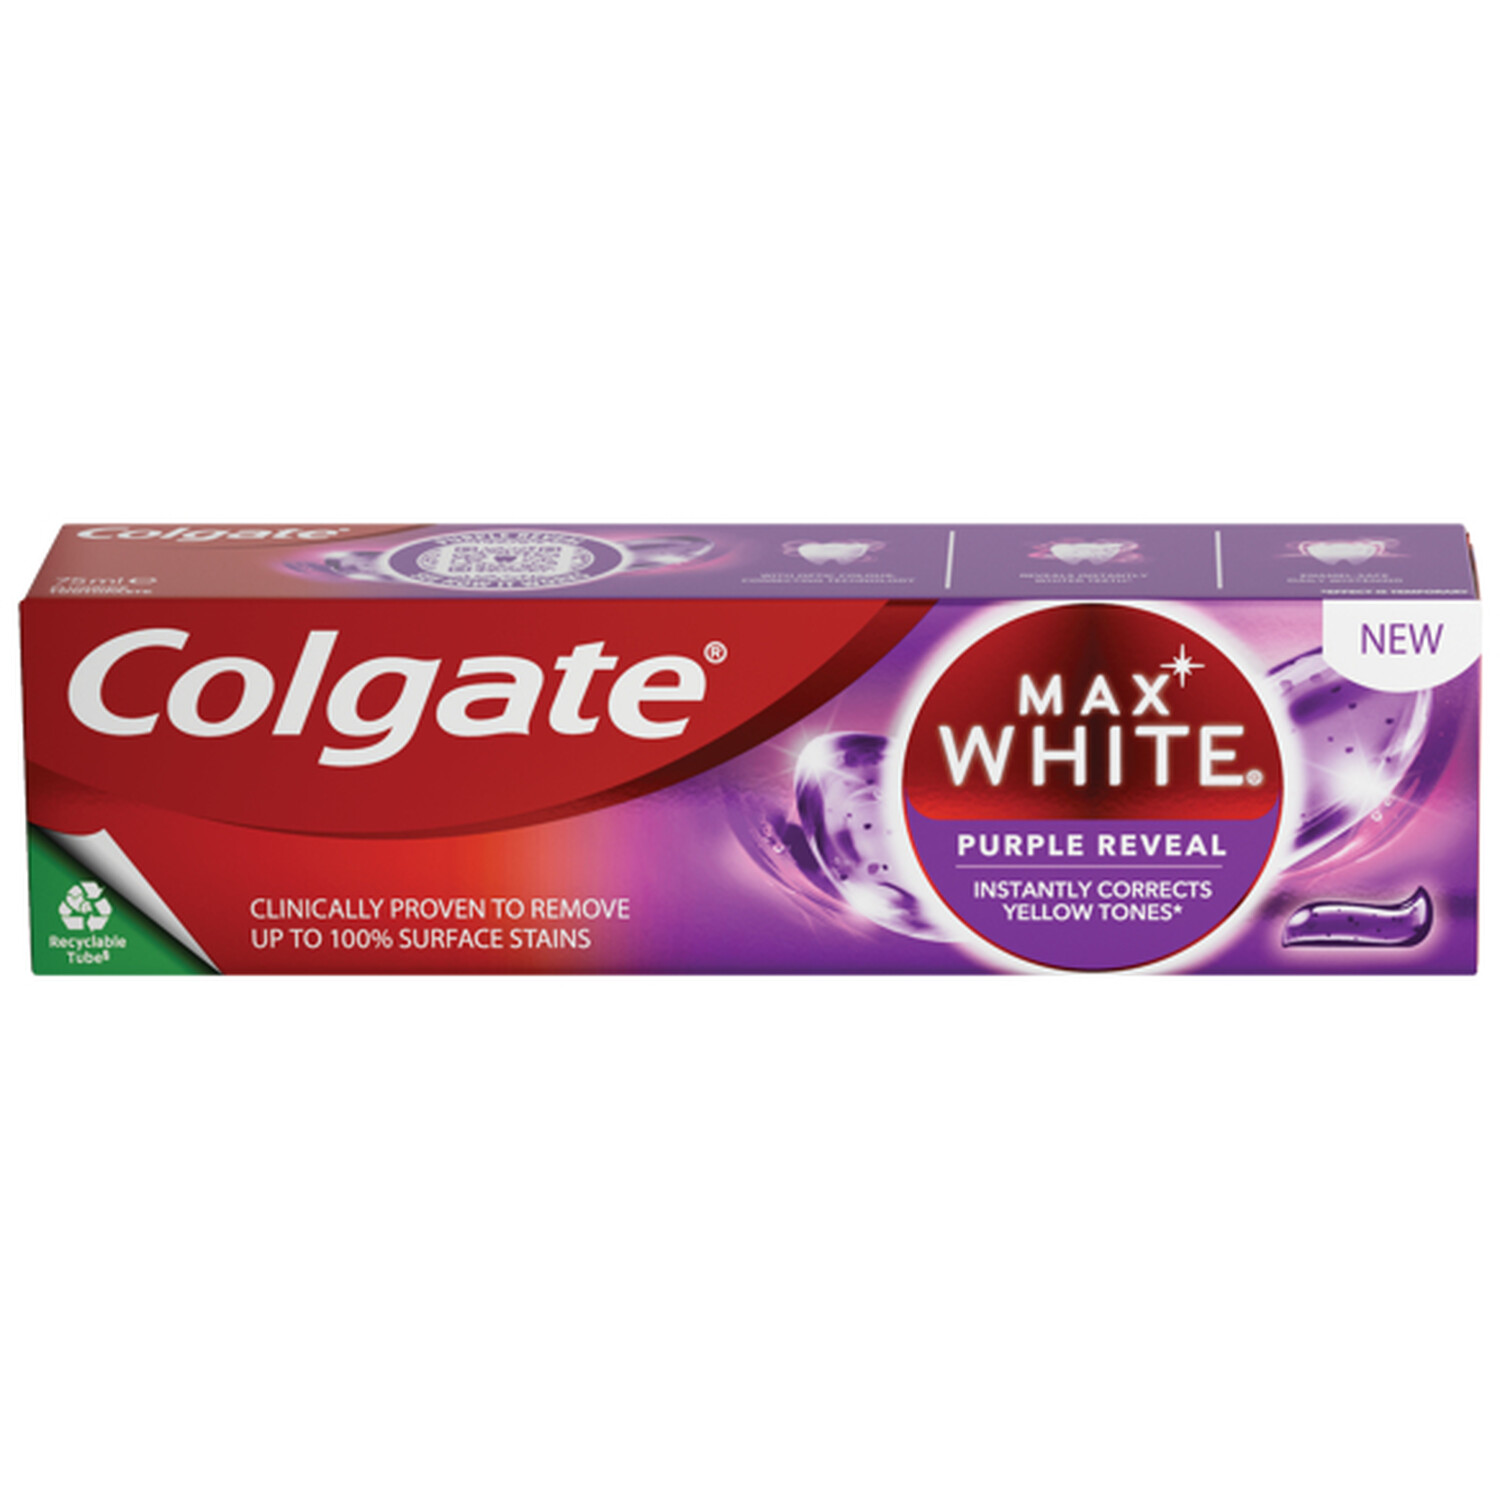 Colgate Max White Purple Reveal Toothpaste 75ml - Red Image